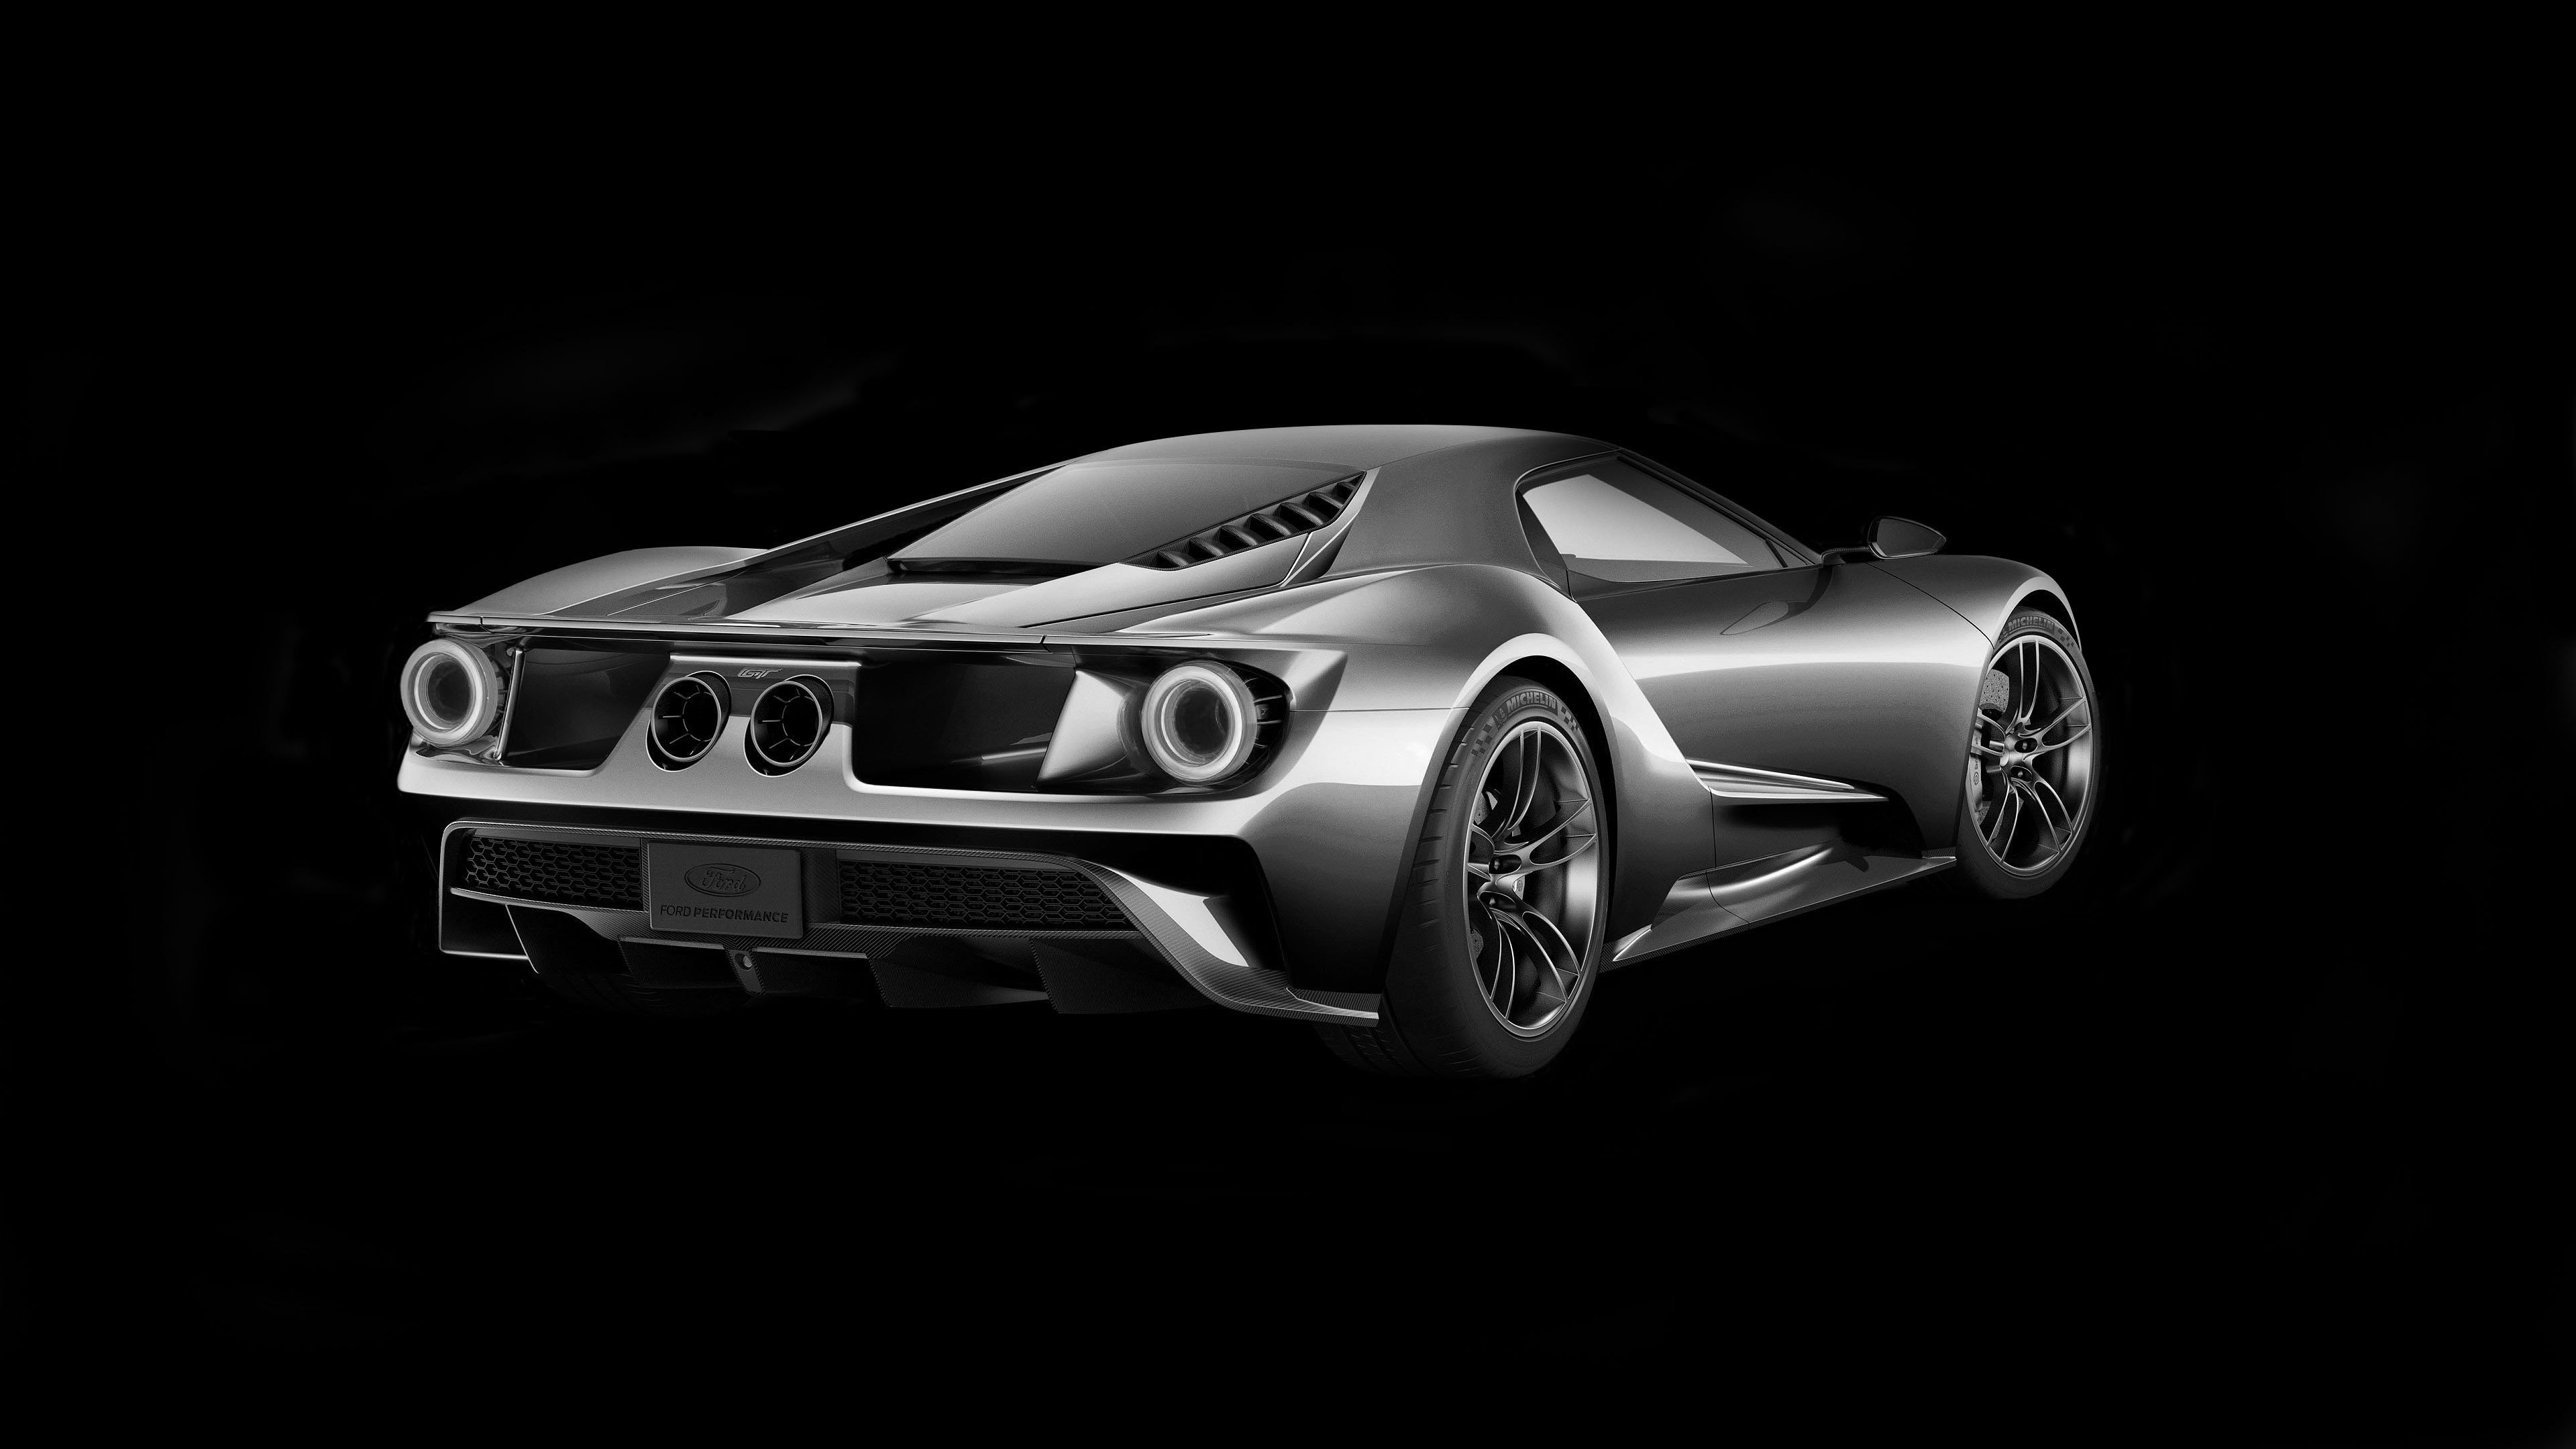 3840x2160 black and white ford gt 3840 x 2160 hd wallpaper | HD .